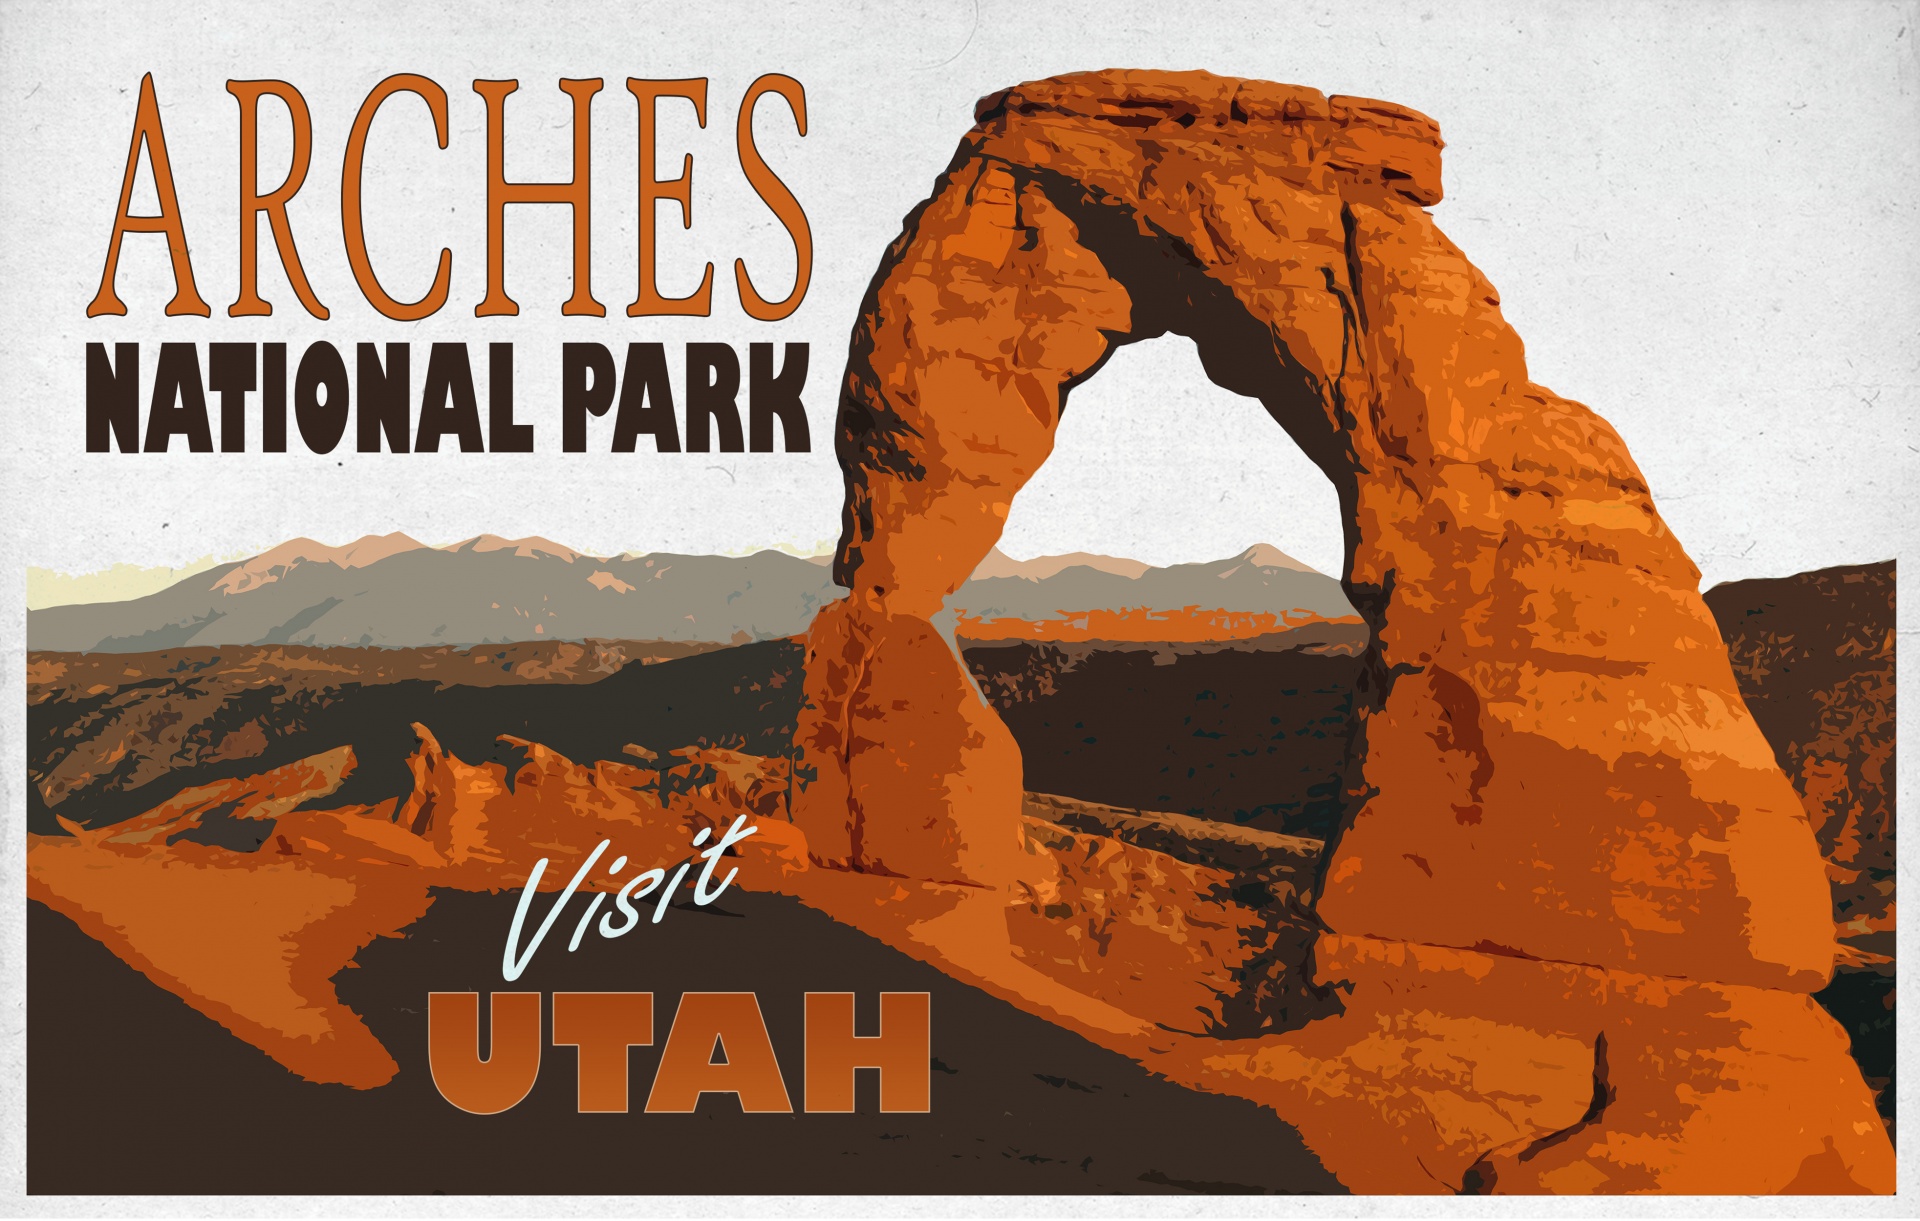 Vintage style travel poster for Arches National Park, Utah, USA